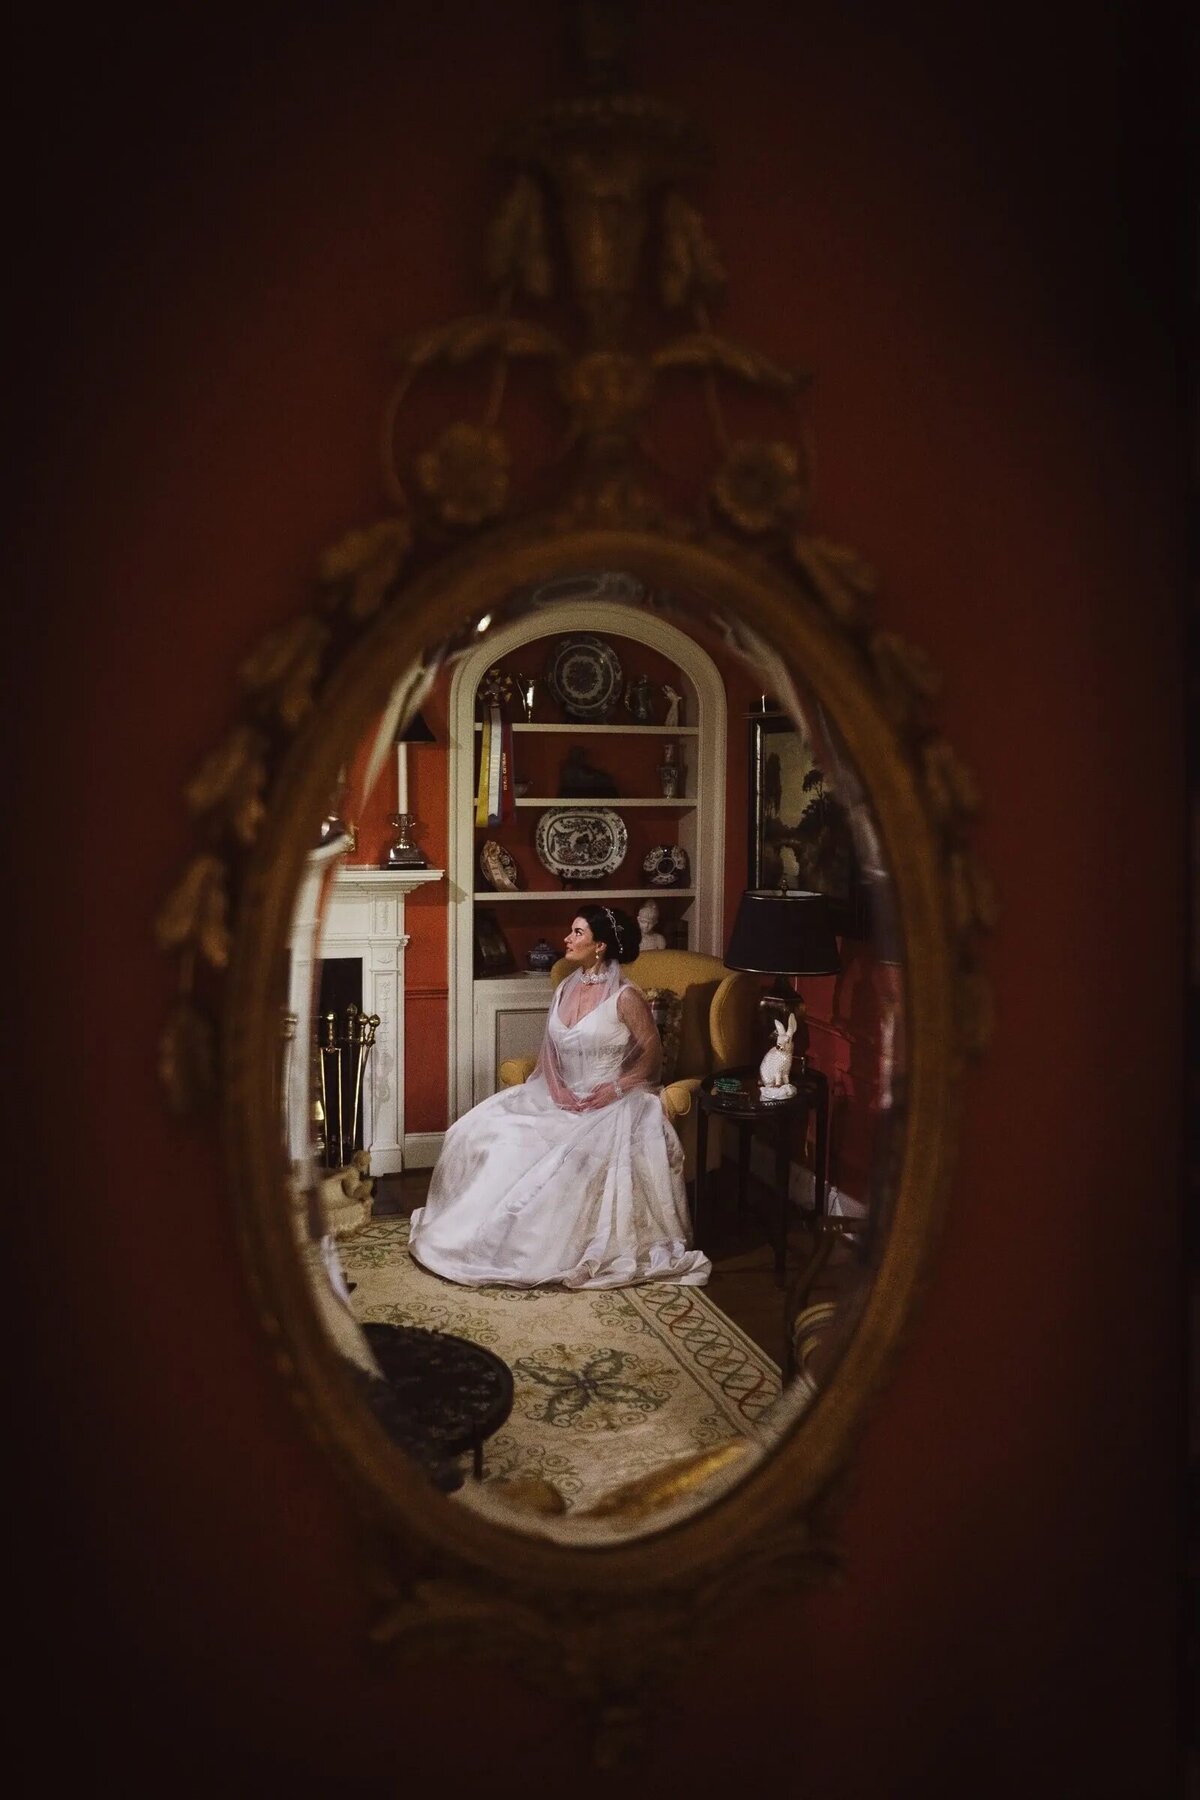 The reflection of a bride sitting in a chair in a mirror